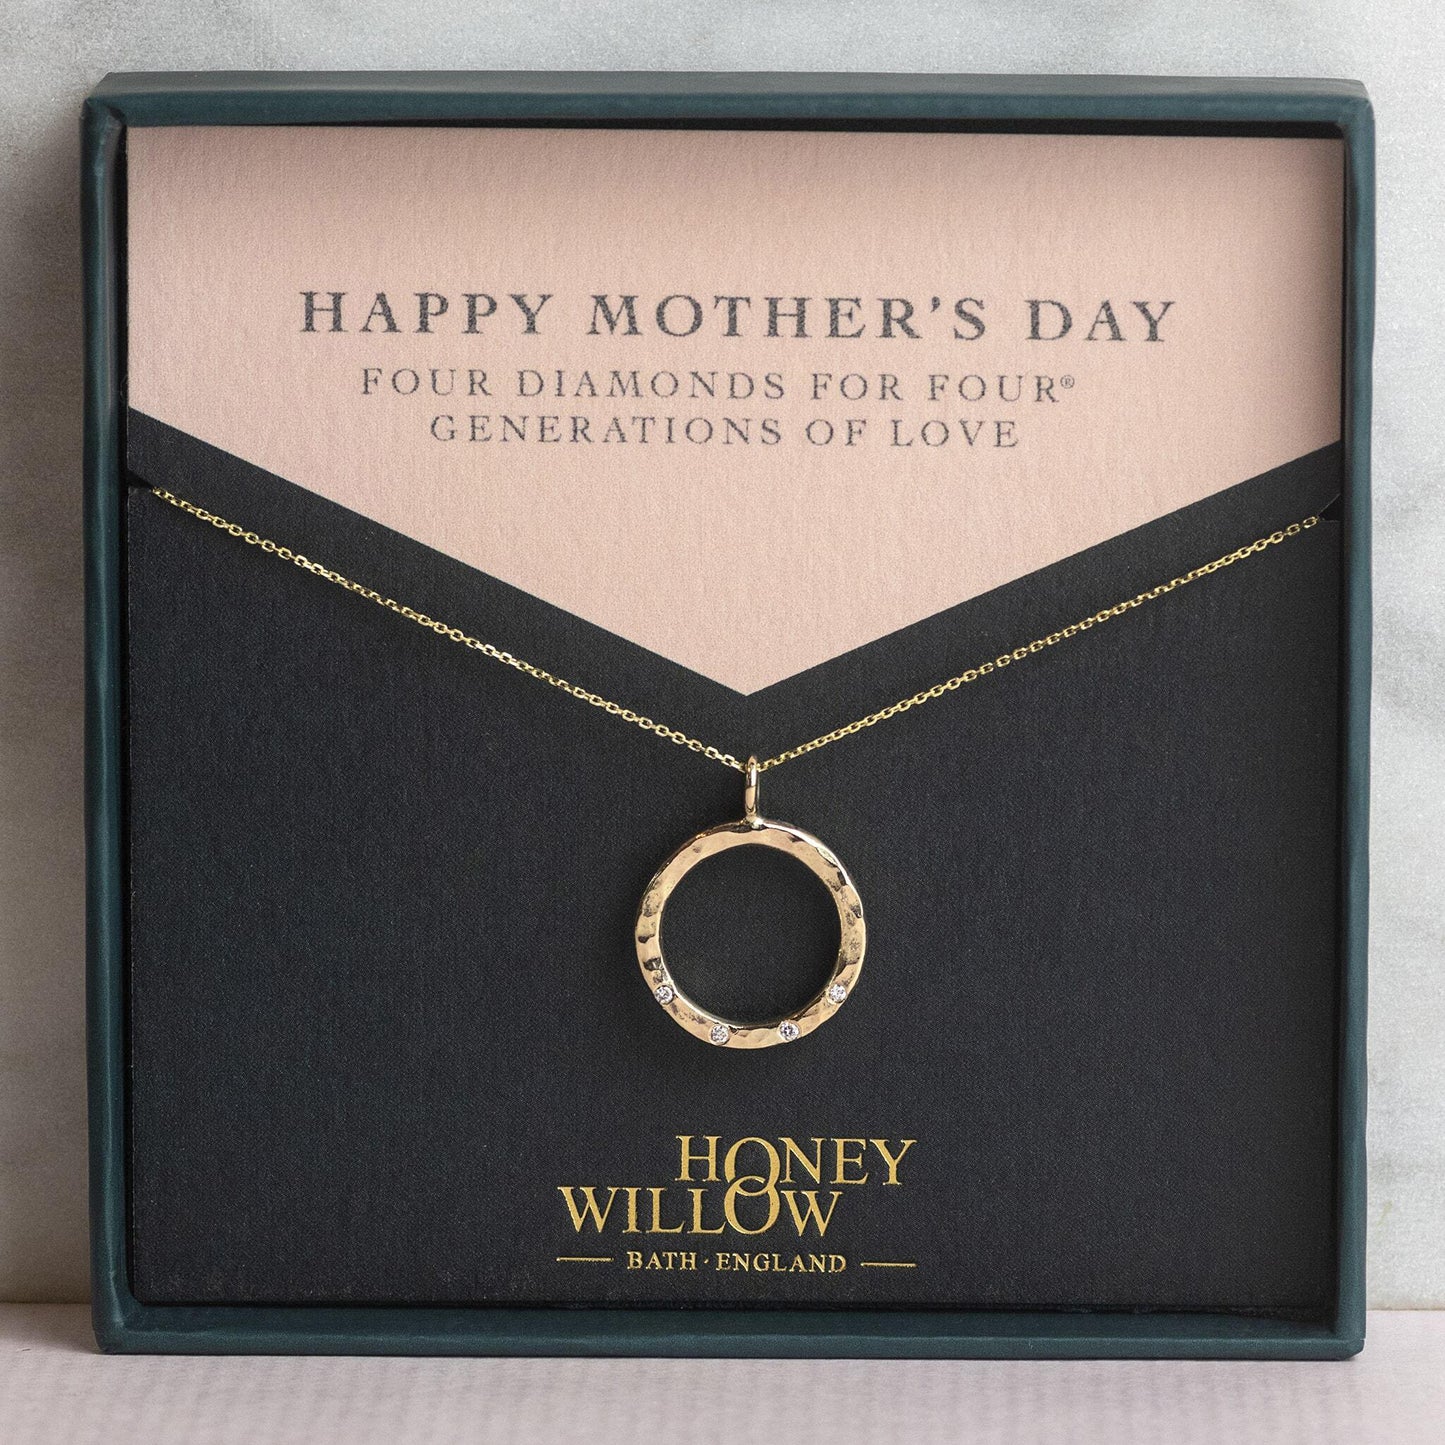 Mother's Day Gift - Recycled 9kt Gold Diamond Halo Necklace - 4 Diamonds for 4® Generations